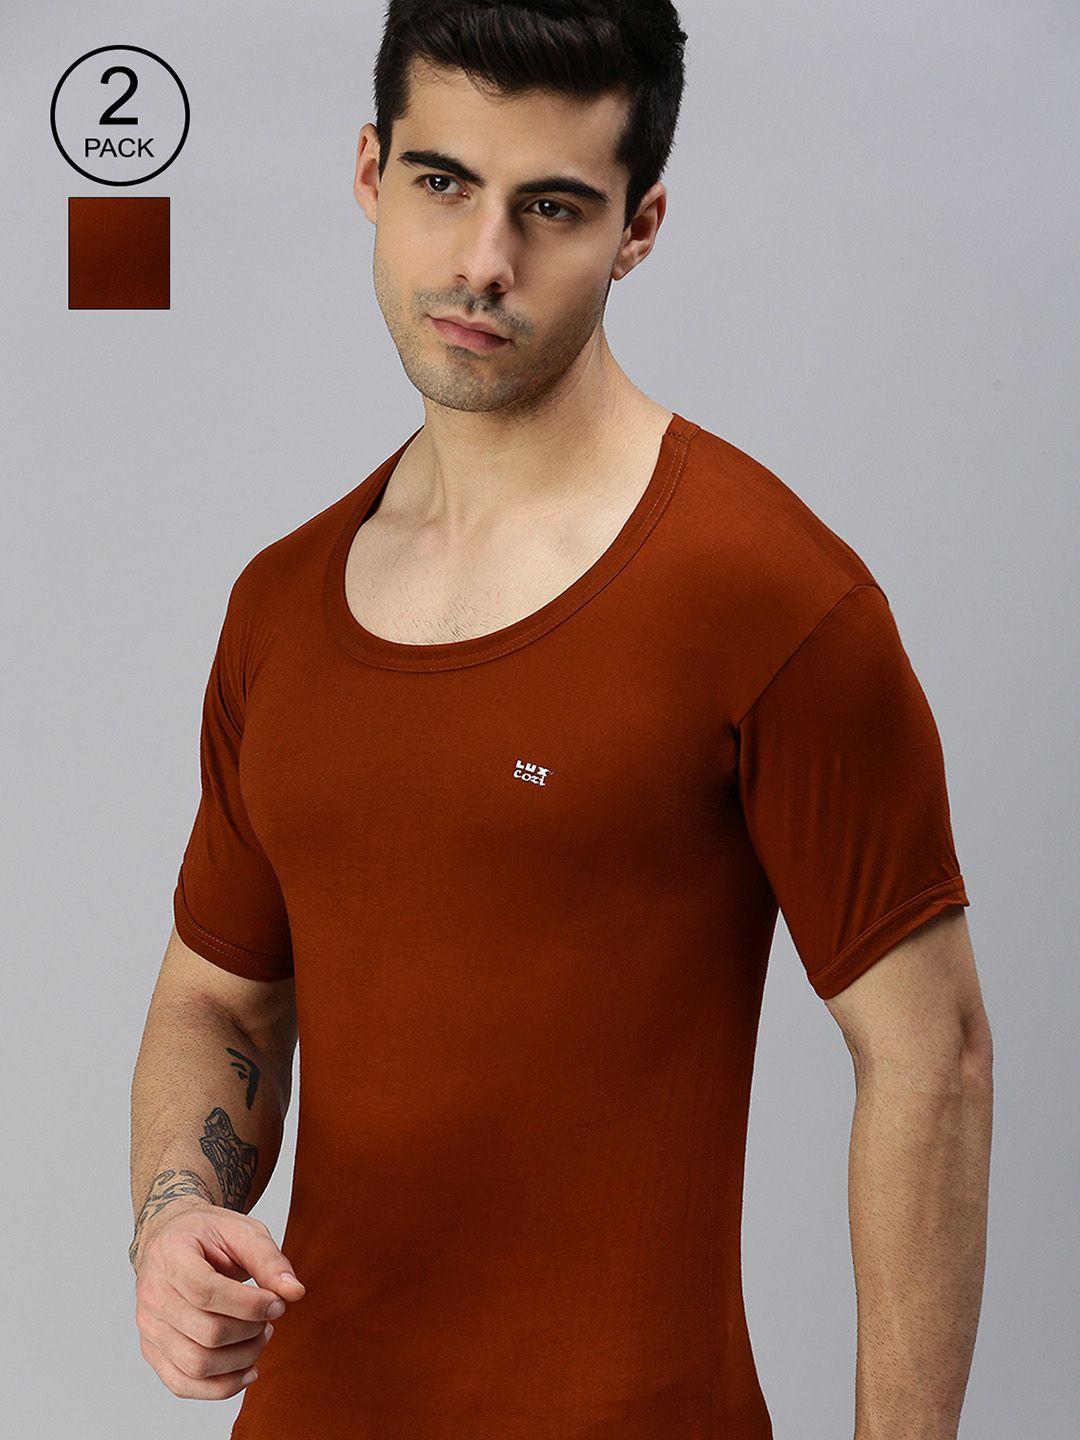 lux-cozi-men-brown-pack-of-2-solid-organic-cotton-basic-innerwear-vests